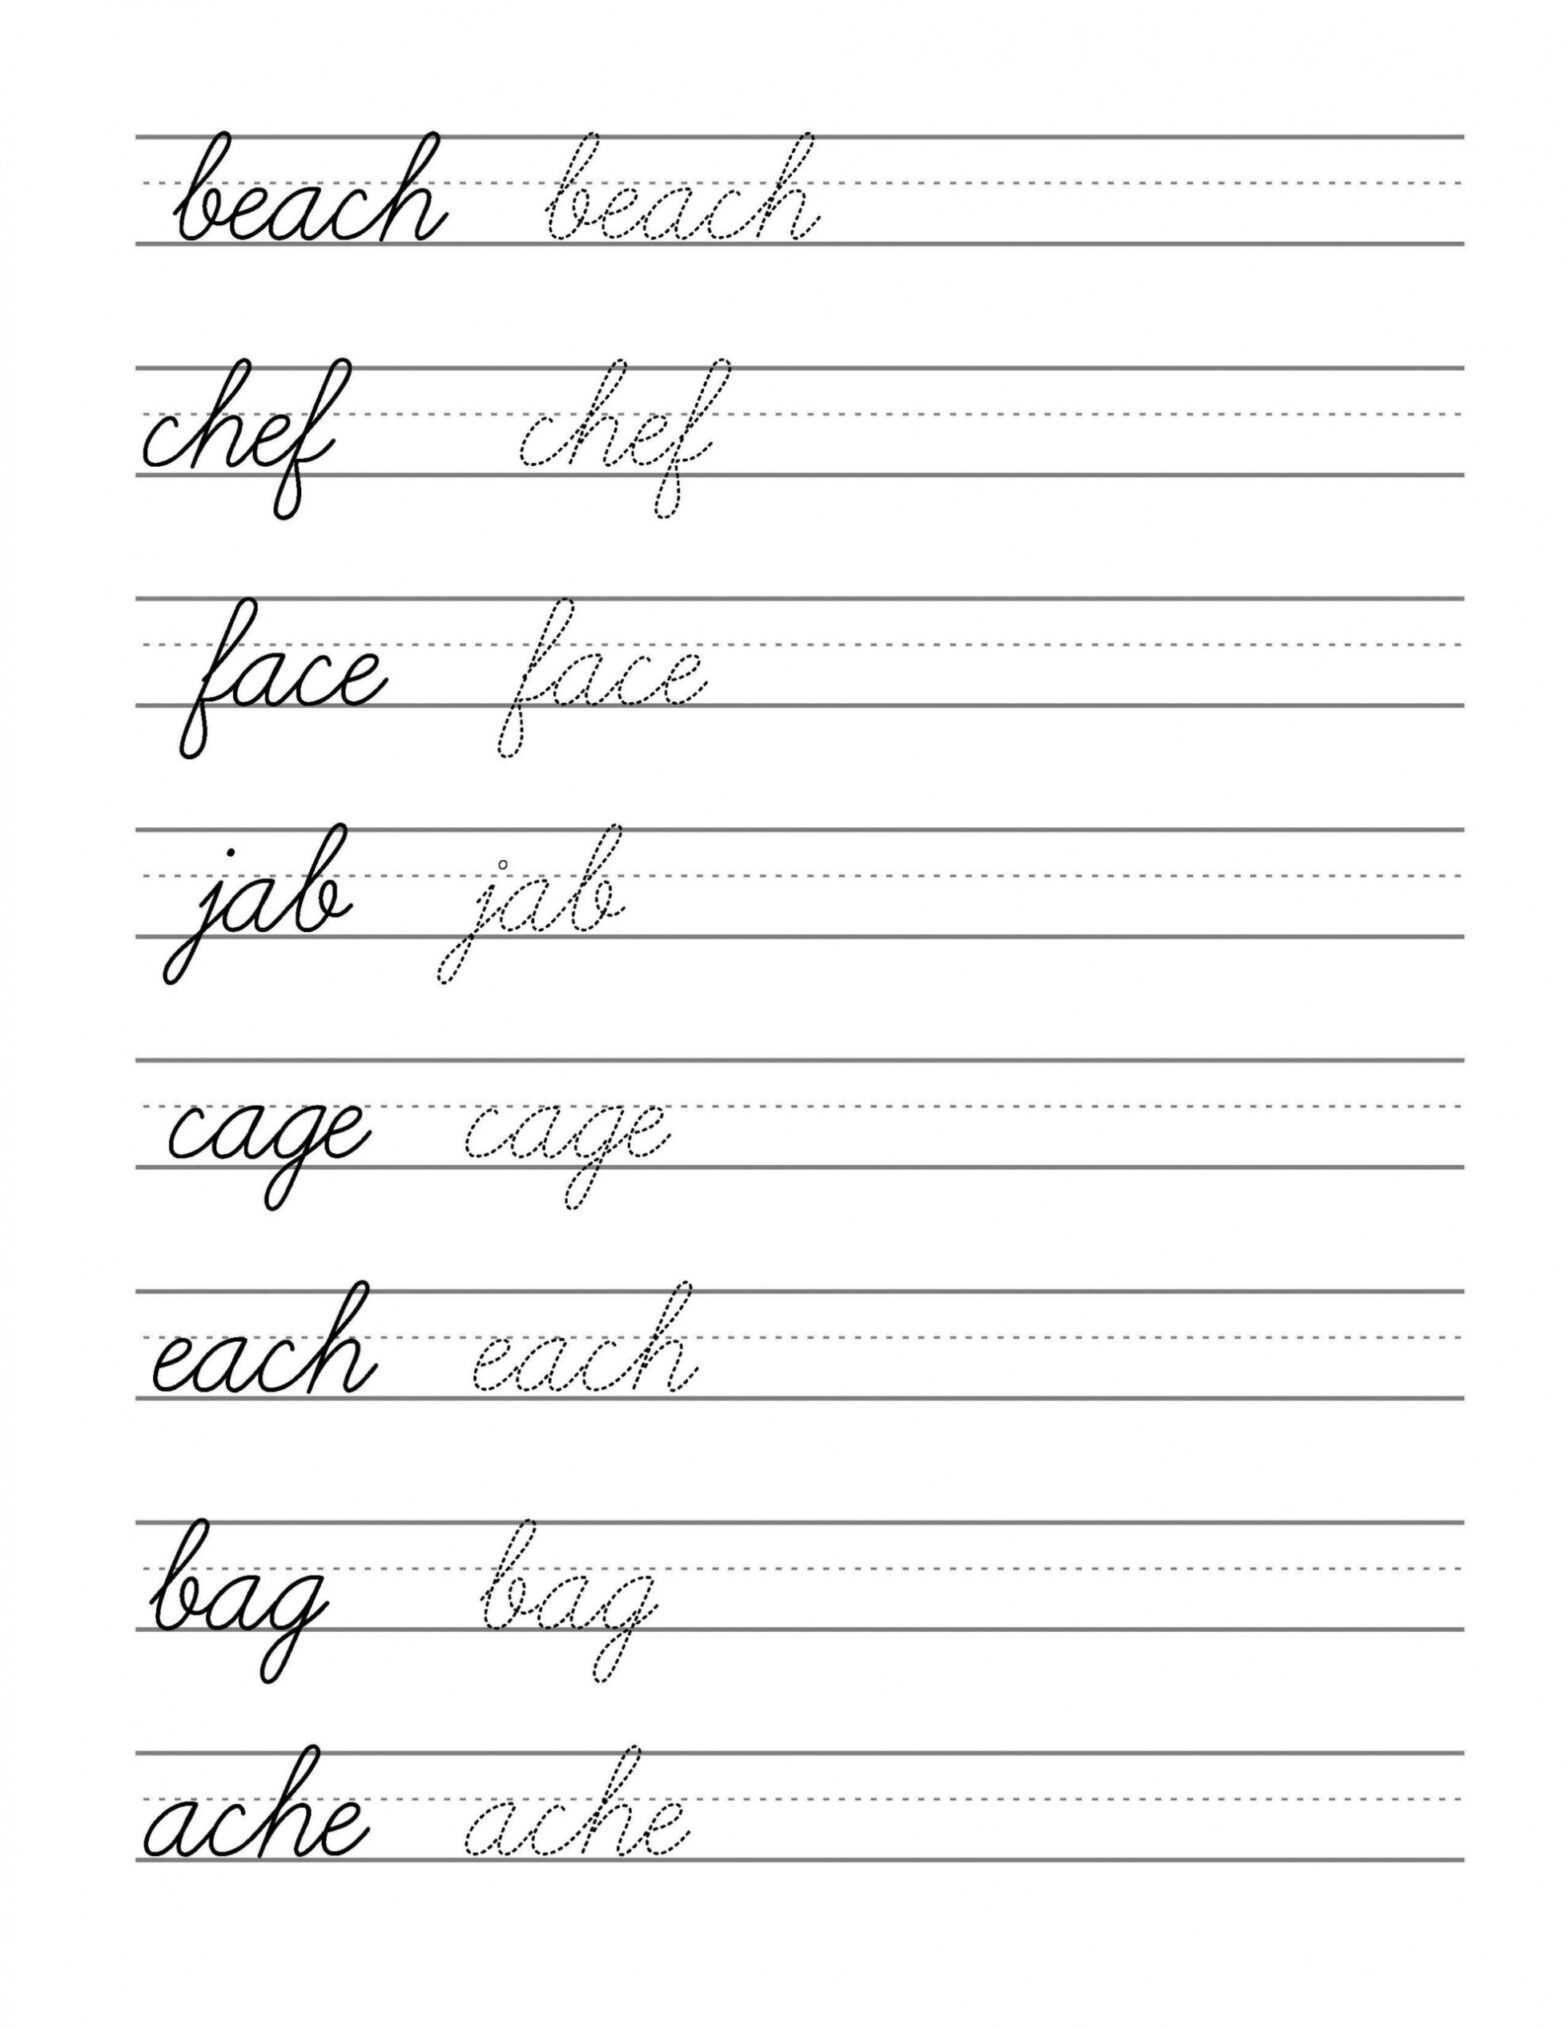 Worksheets : Free Beginning Cursive Writing Template Part regarding Handwriting Without Tears Letter Templates